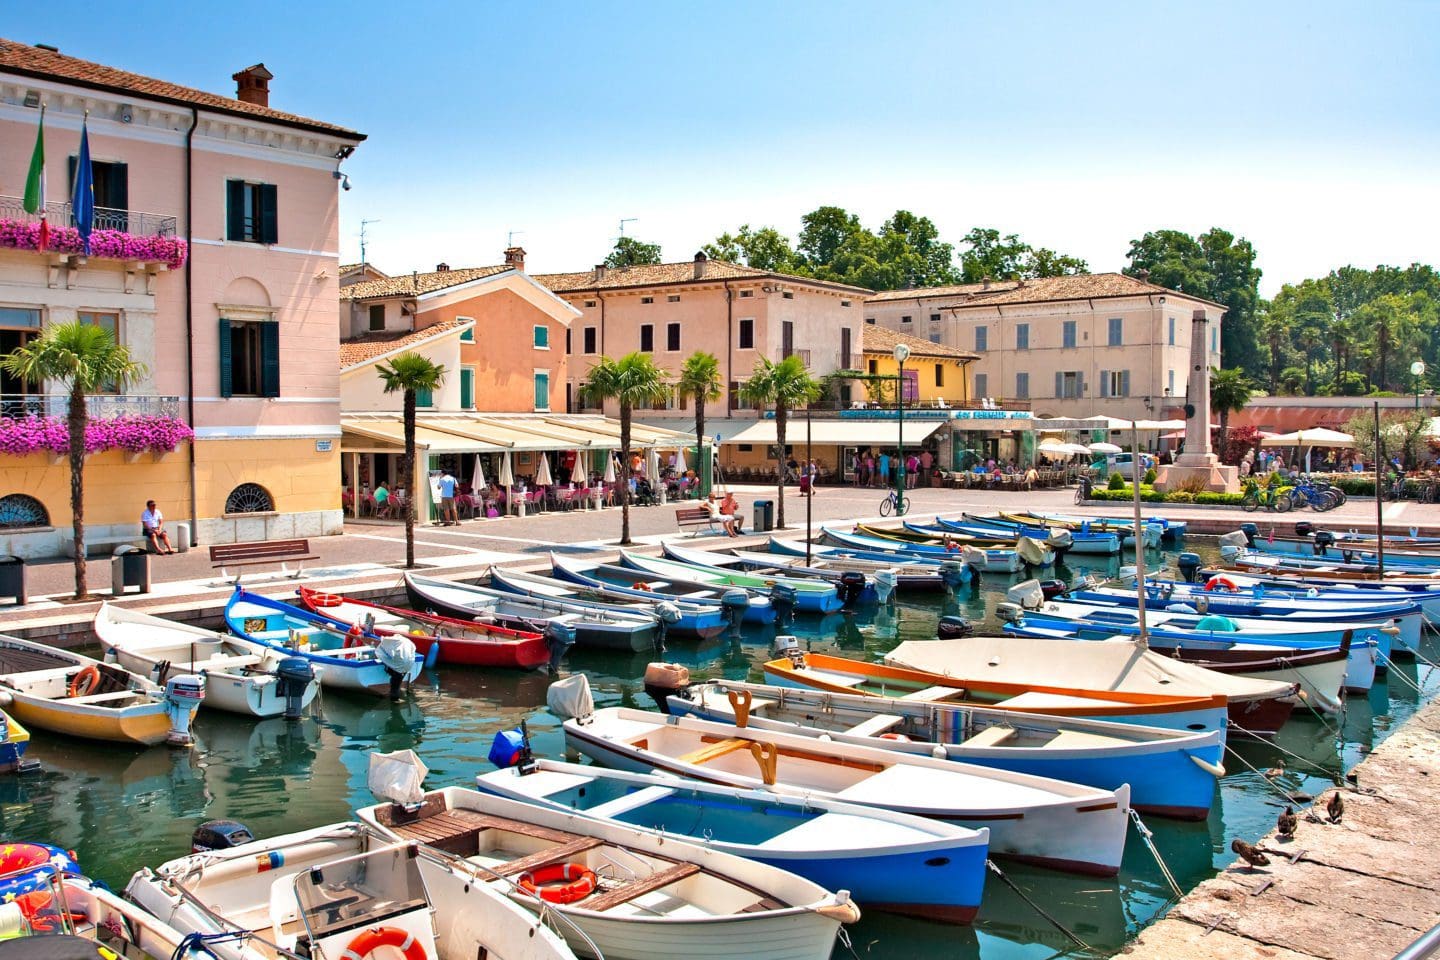 What to do in Bardolino